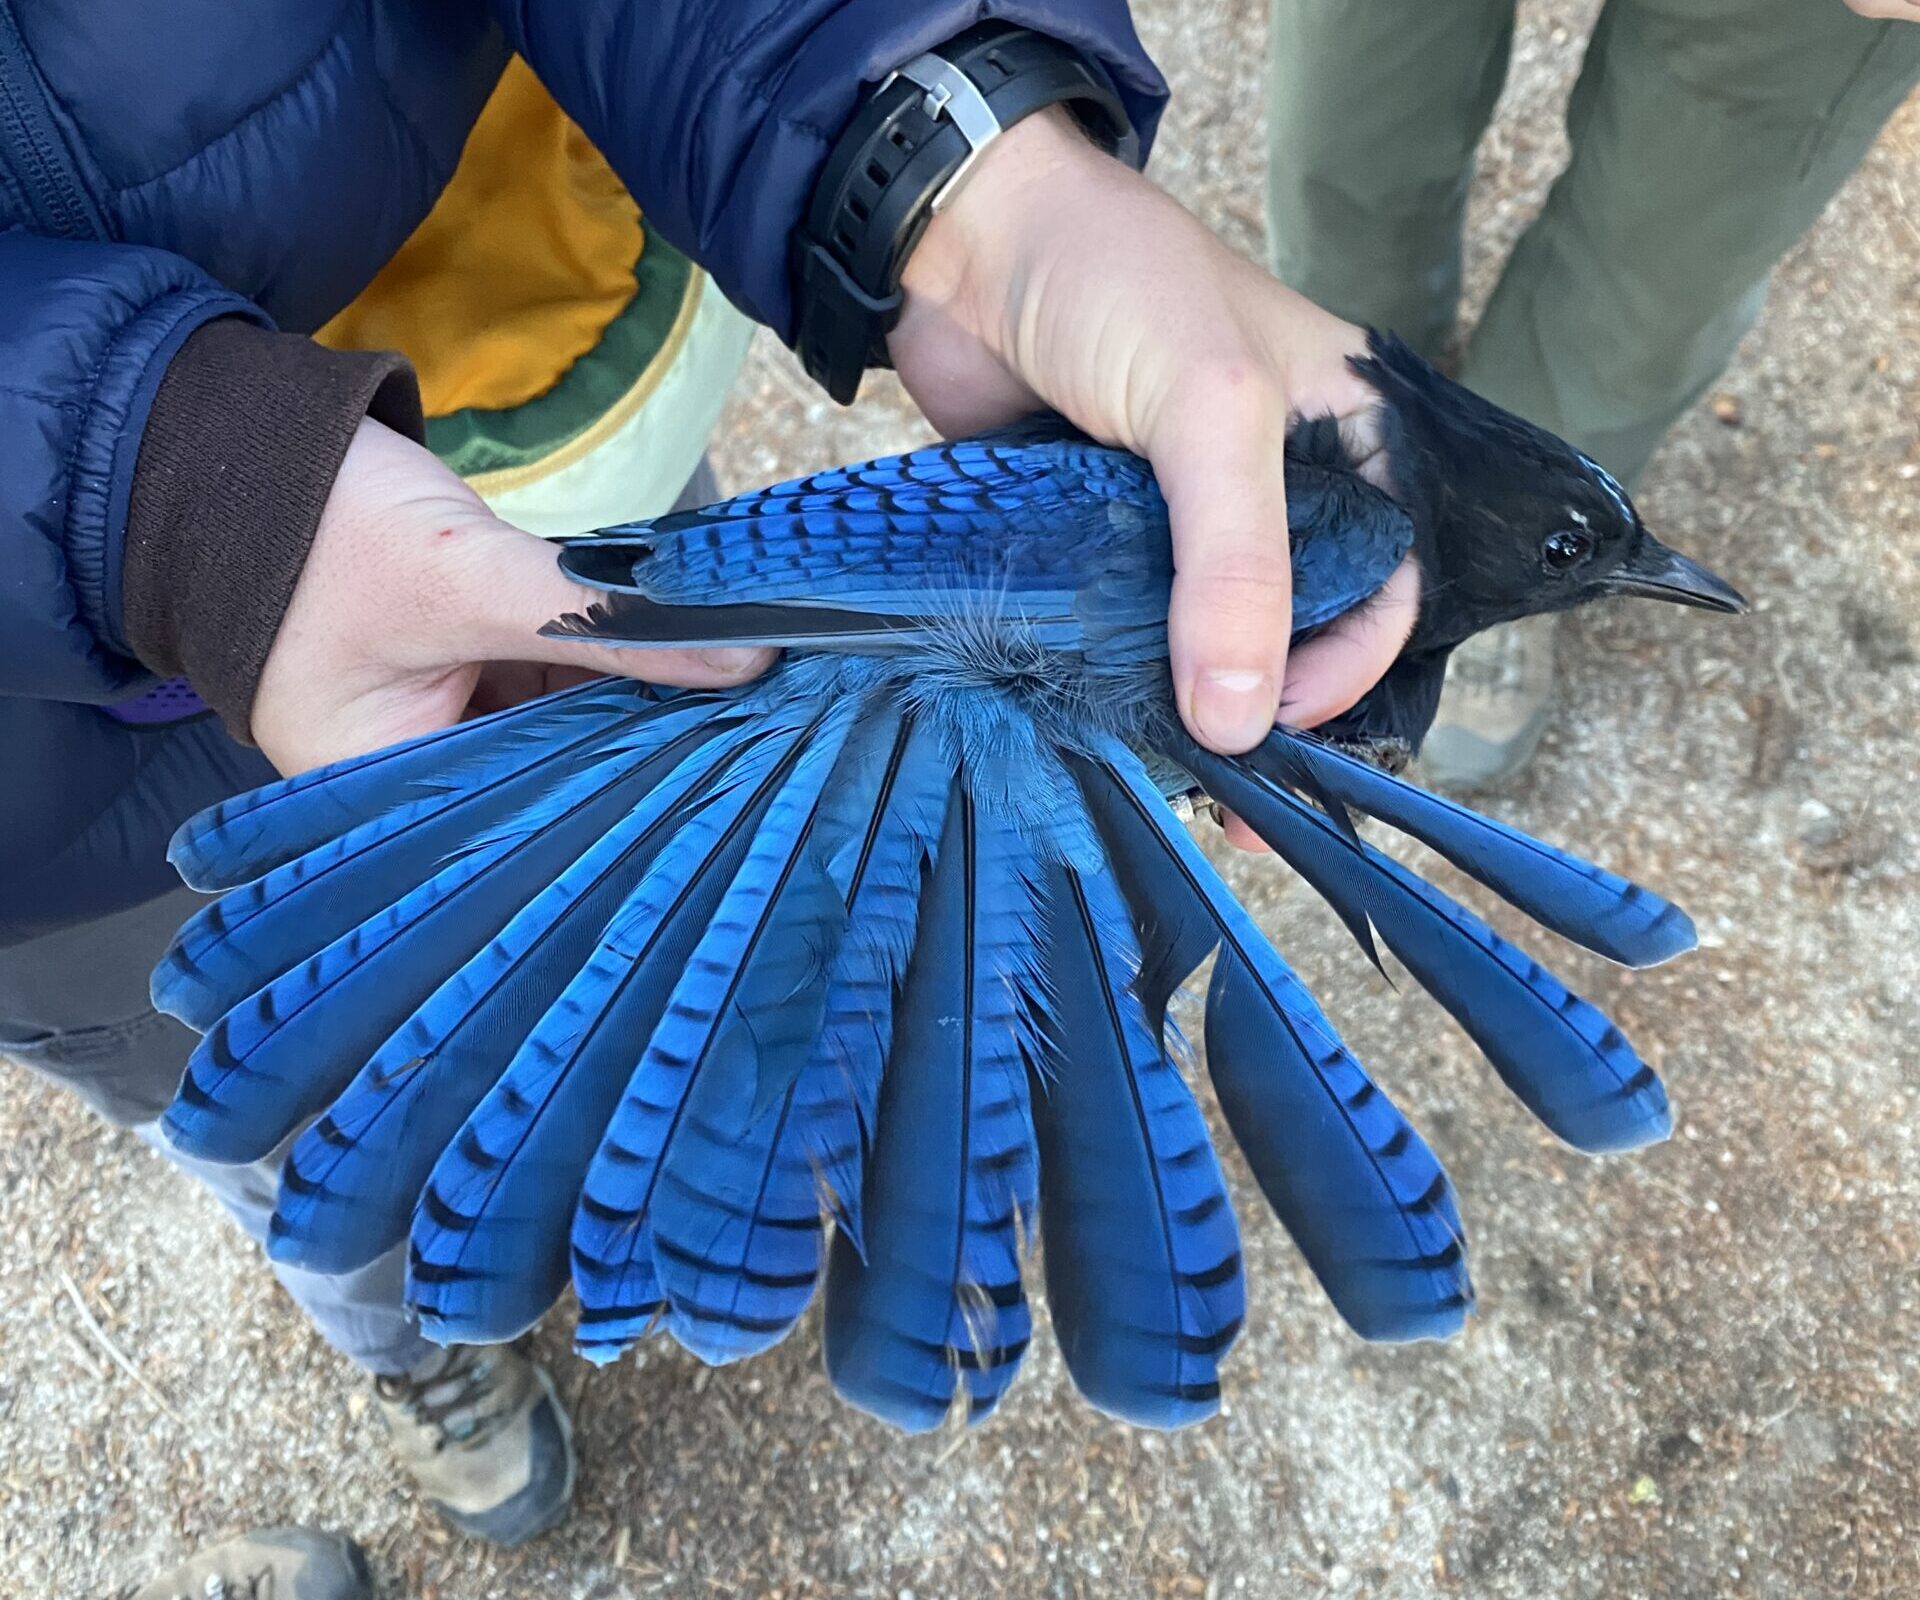 A bander wearing a blue coat and a watch gently holds a large blue Steller's Jay in bander's grip. It has a black head and crest . The stunning iridescent blue tail is spread to show the broad tips to the feathers and black tiger-striped barring.